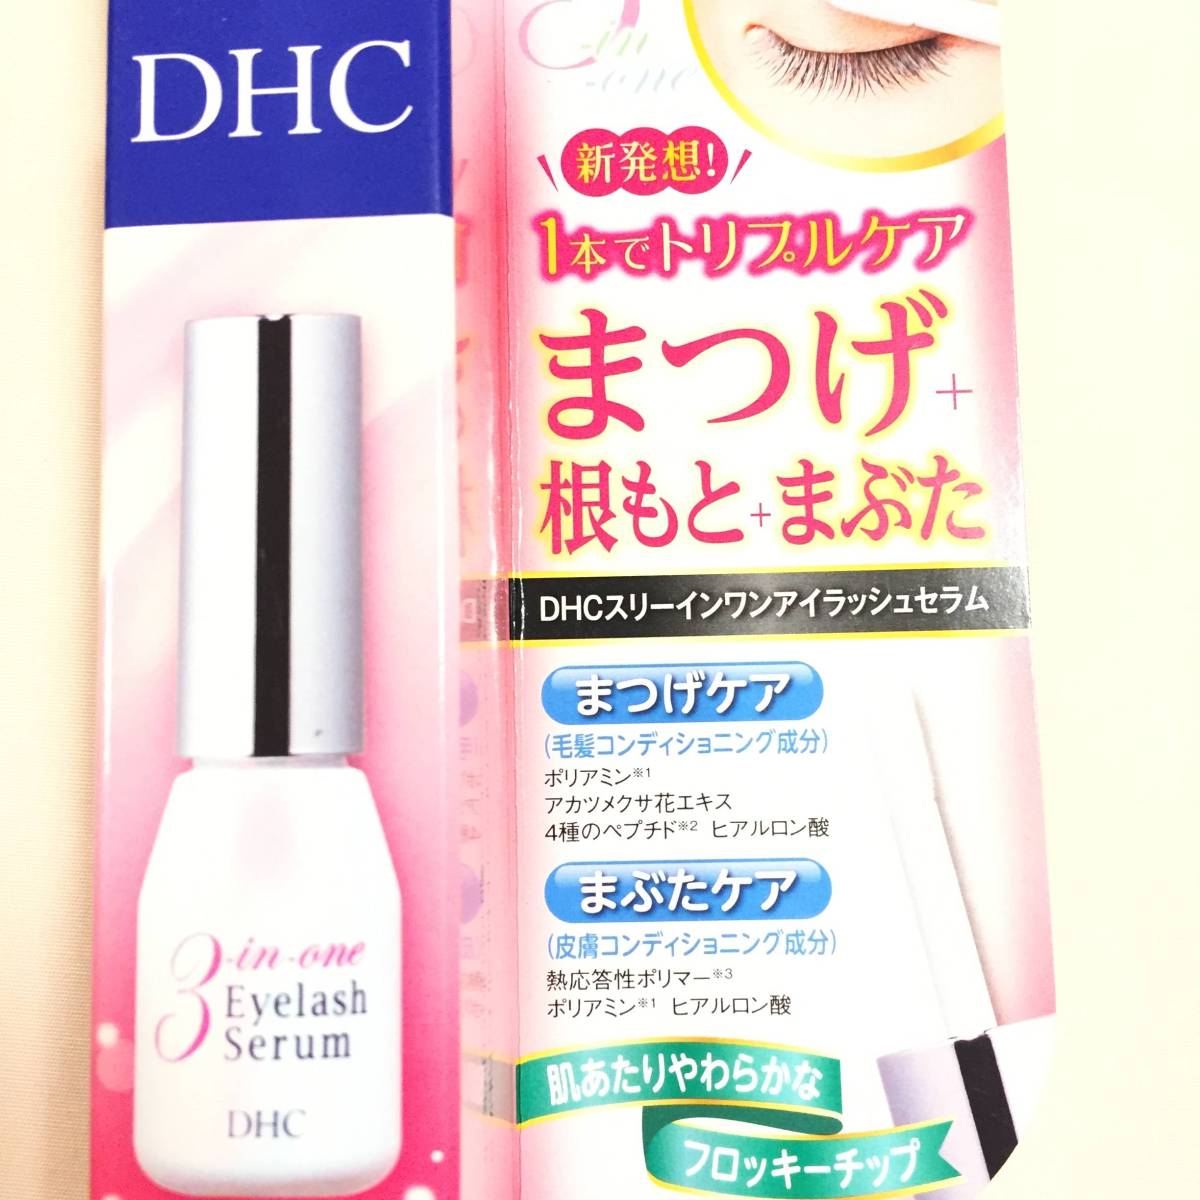  new goods *DHC (ti- H si-) three in one eyelashes Sera m( eyelashes *... for beauty care liquid )*